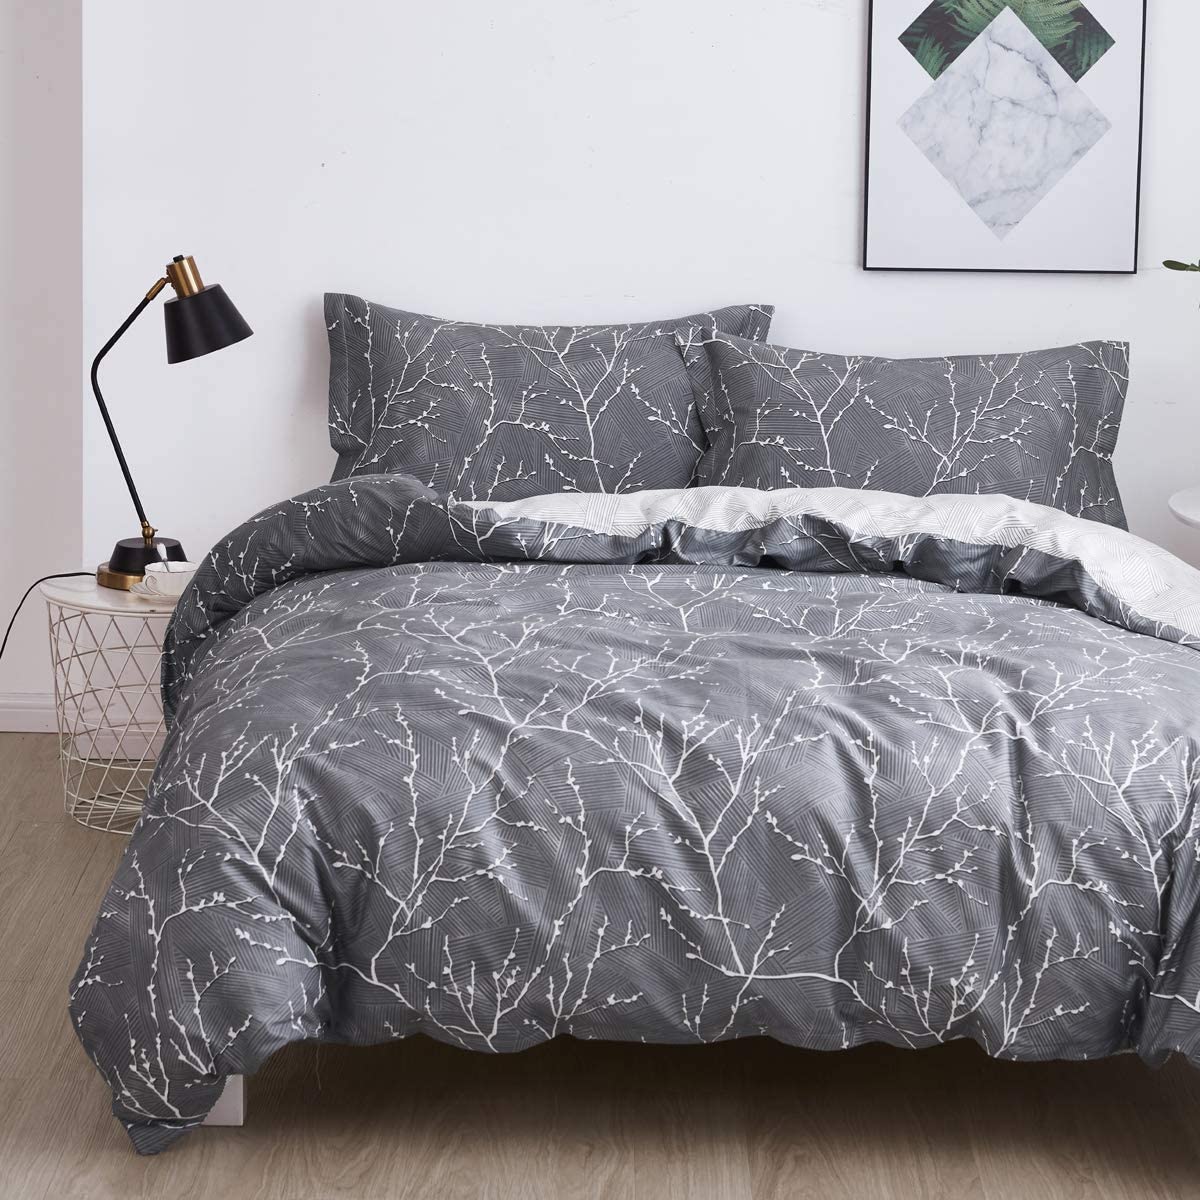 Price:$39.99 OAITE Duvet Cover Set, 100% Cotton Duvet Cover, Ultra Soft and Easy Care, Bedding Twin Queen King Size Set, 3-Piece Duvet Cover Set Includes 2 Pillow Shams (Branch, Queen) : Home & Kitchen